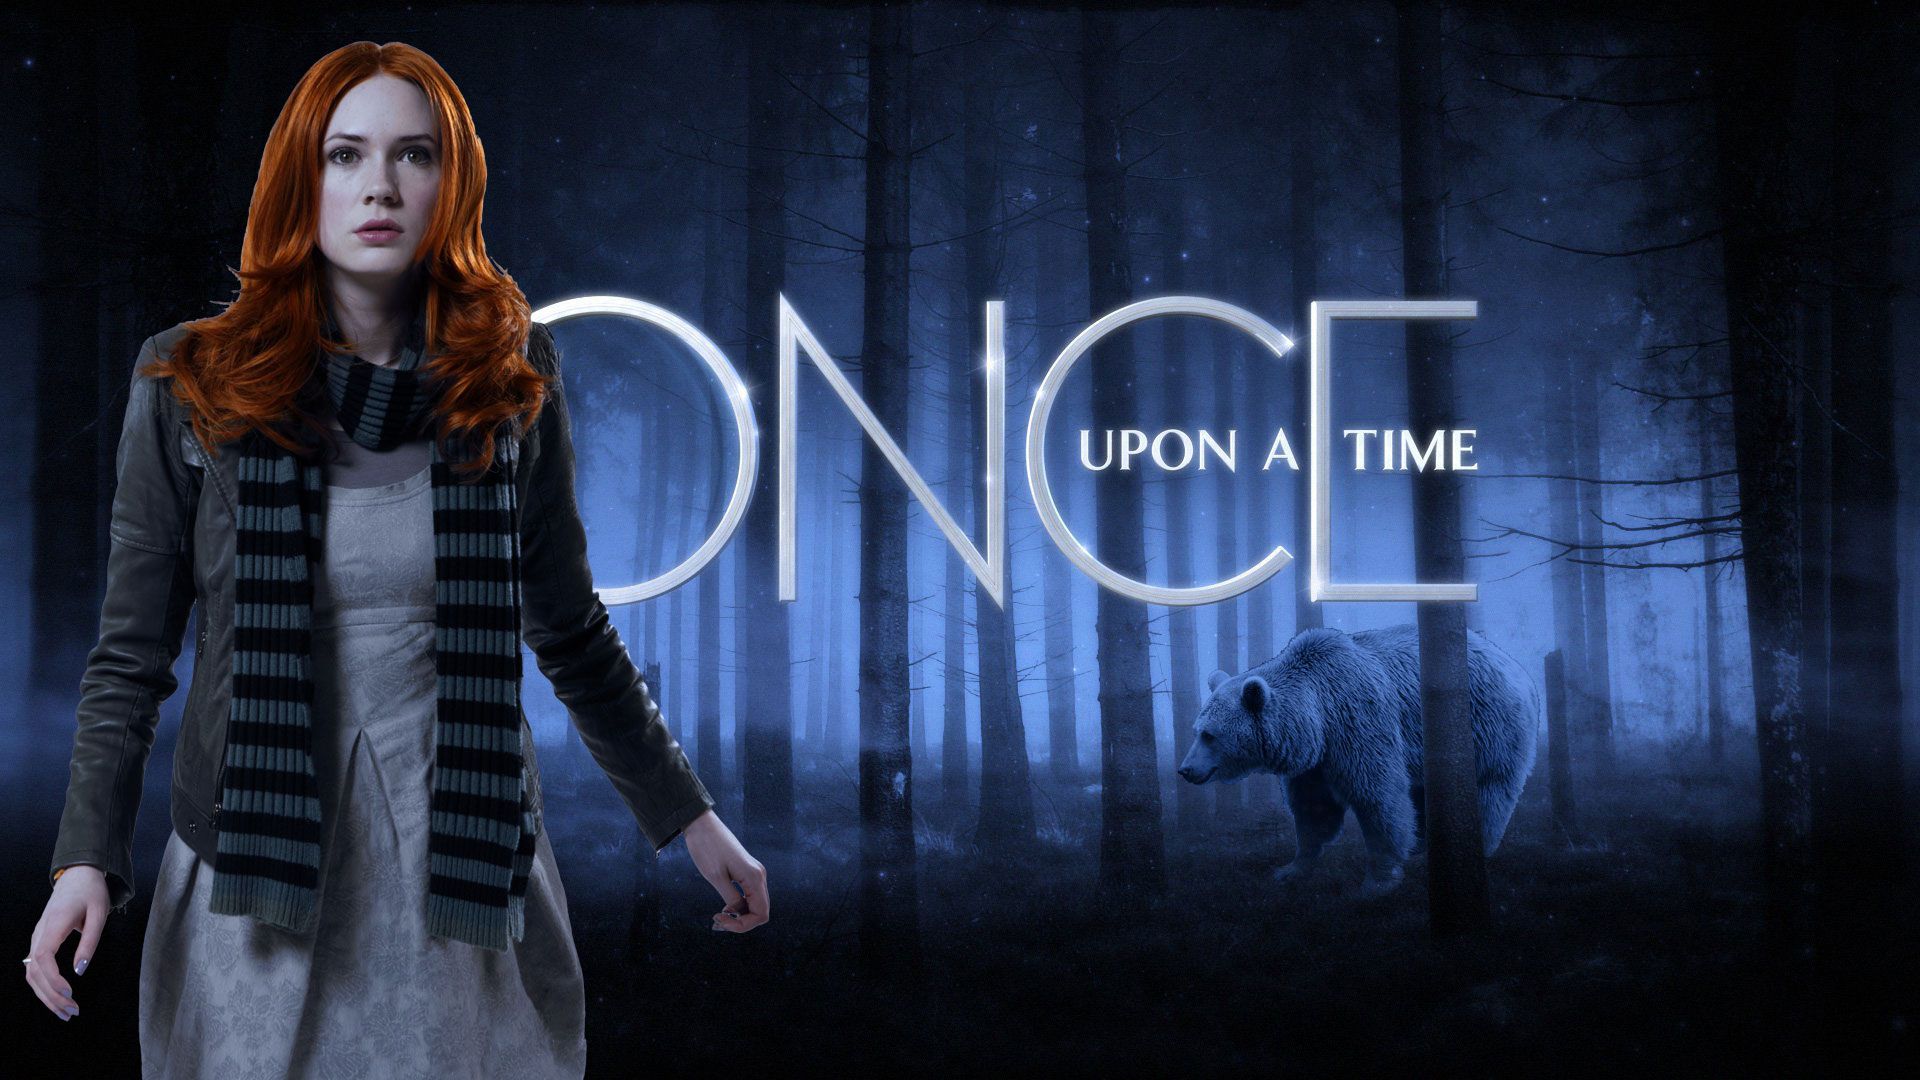 Wallpaper Of Once Upon A Time You Are Ing